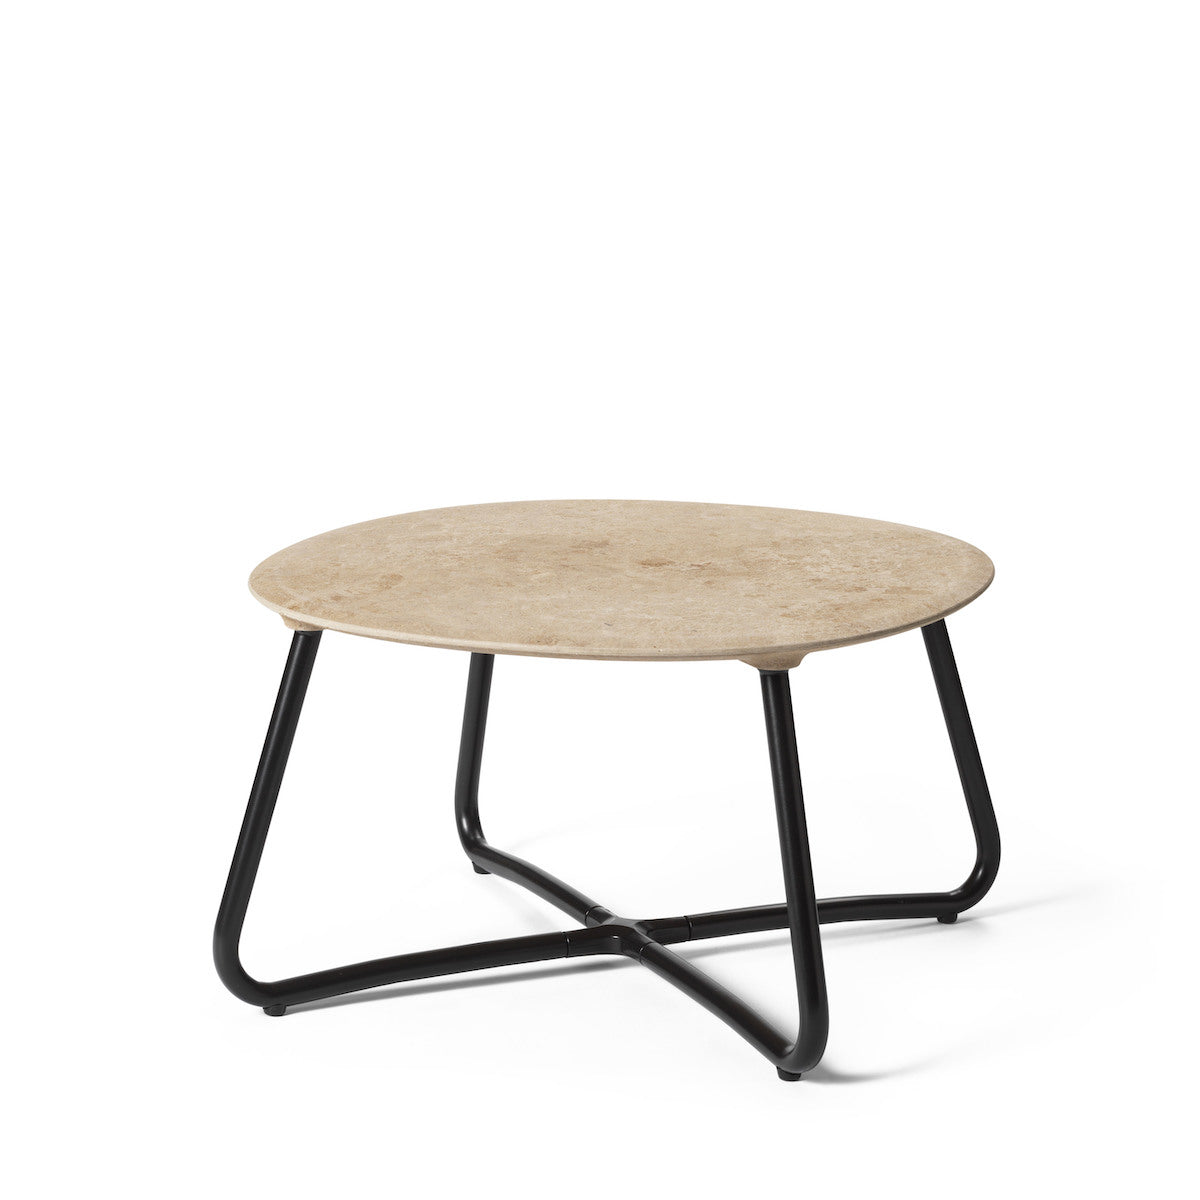 Lily Lounge Table